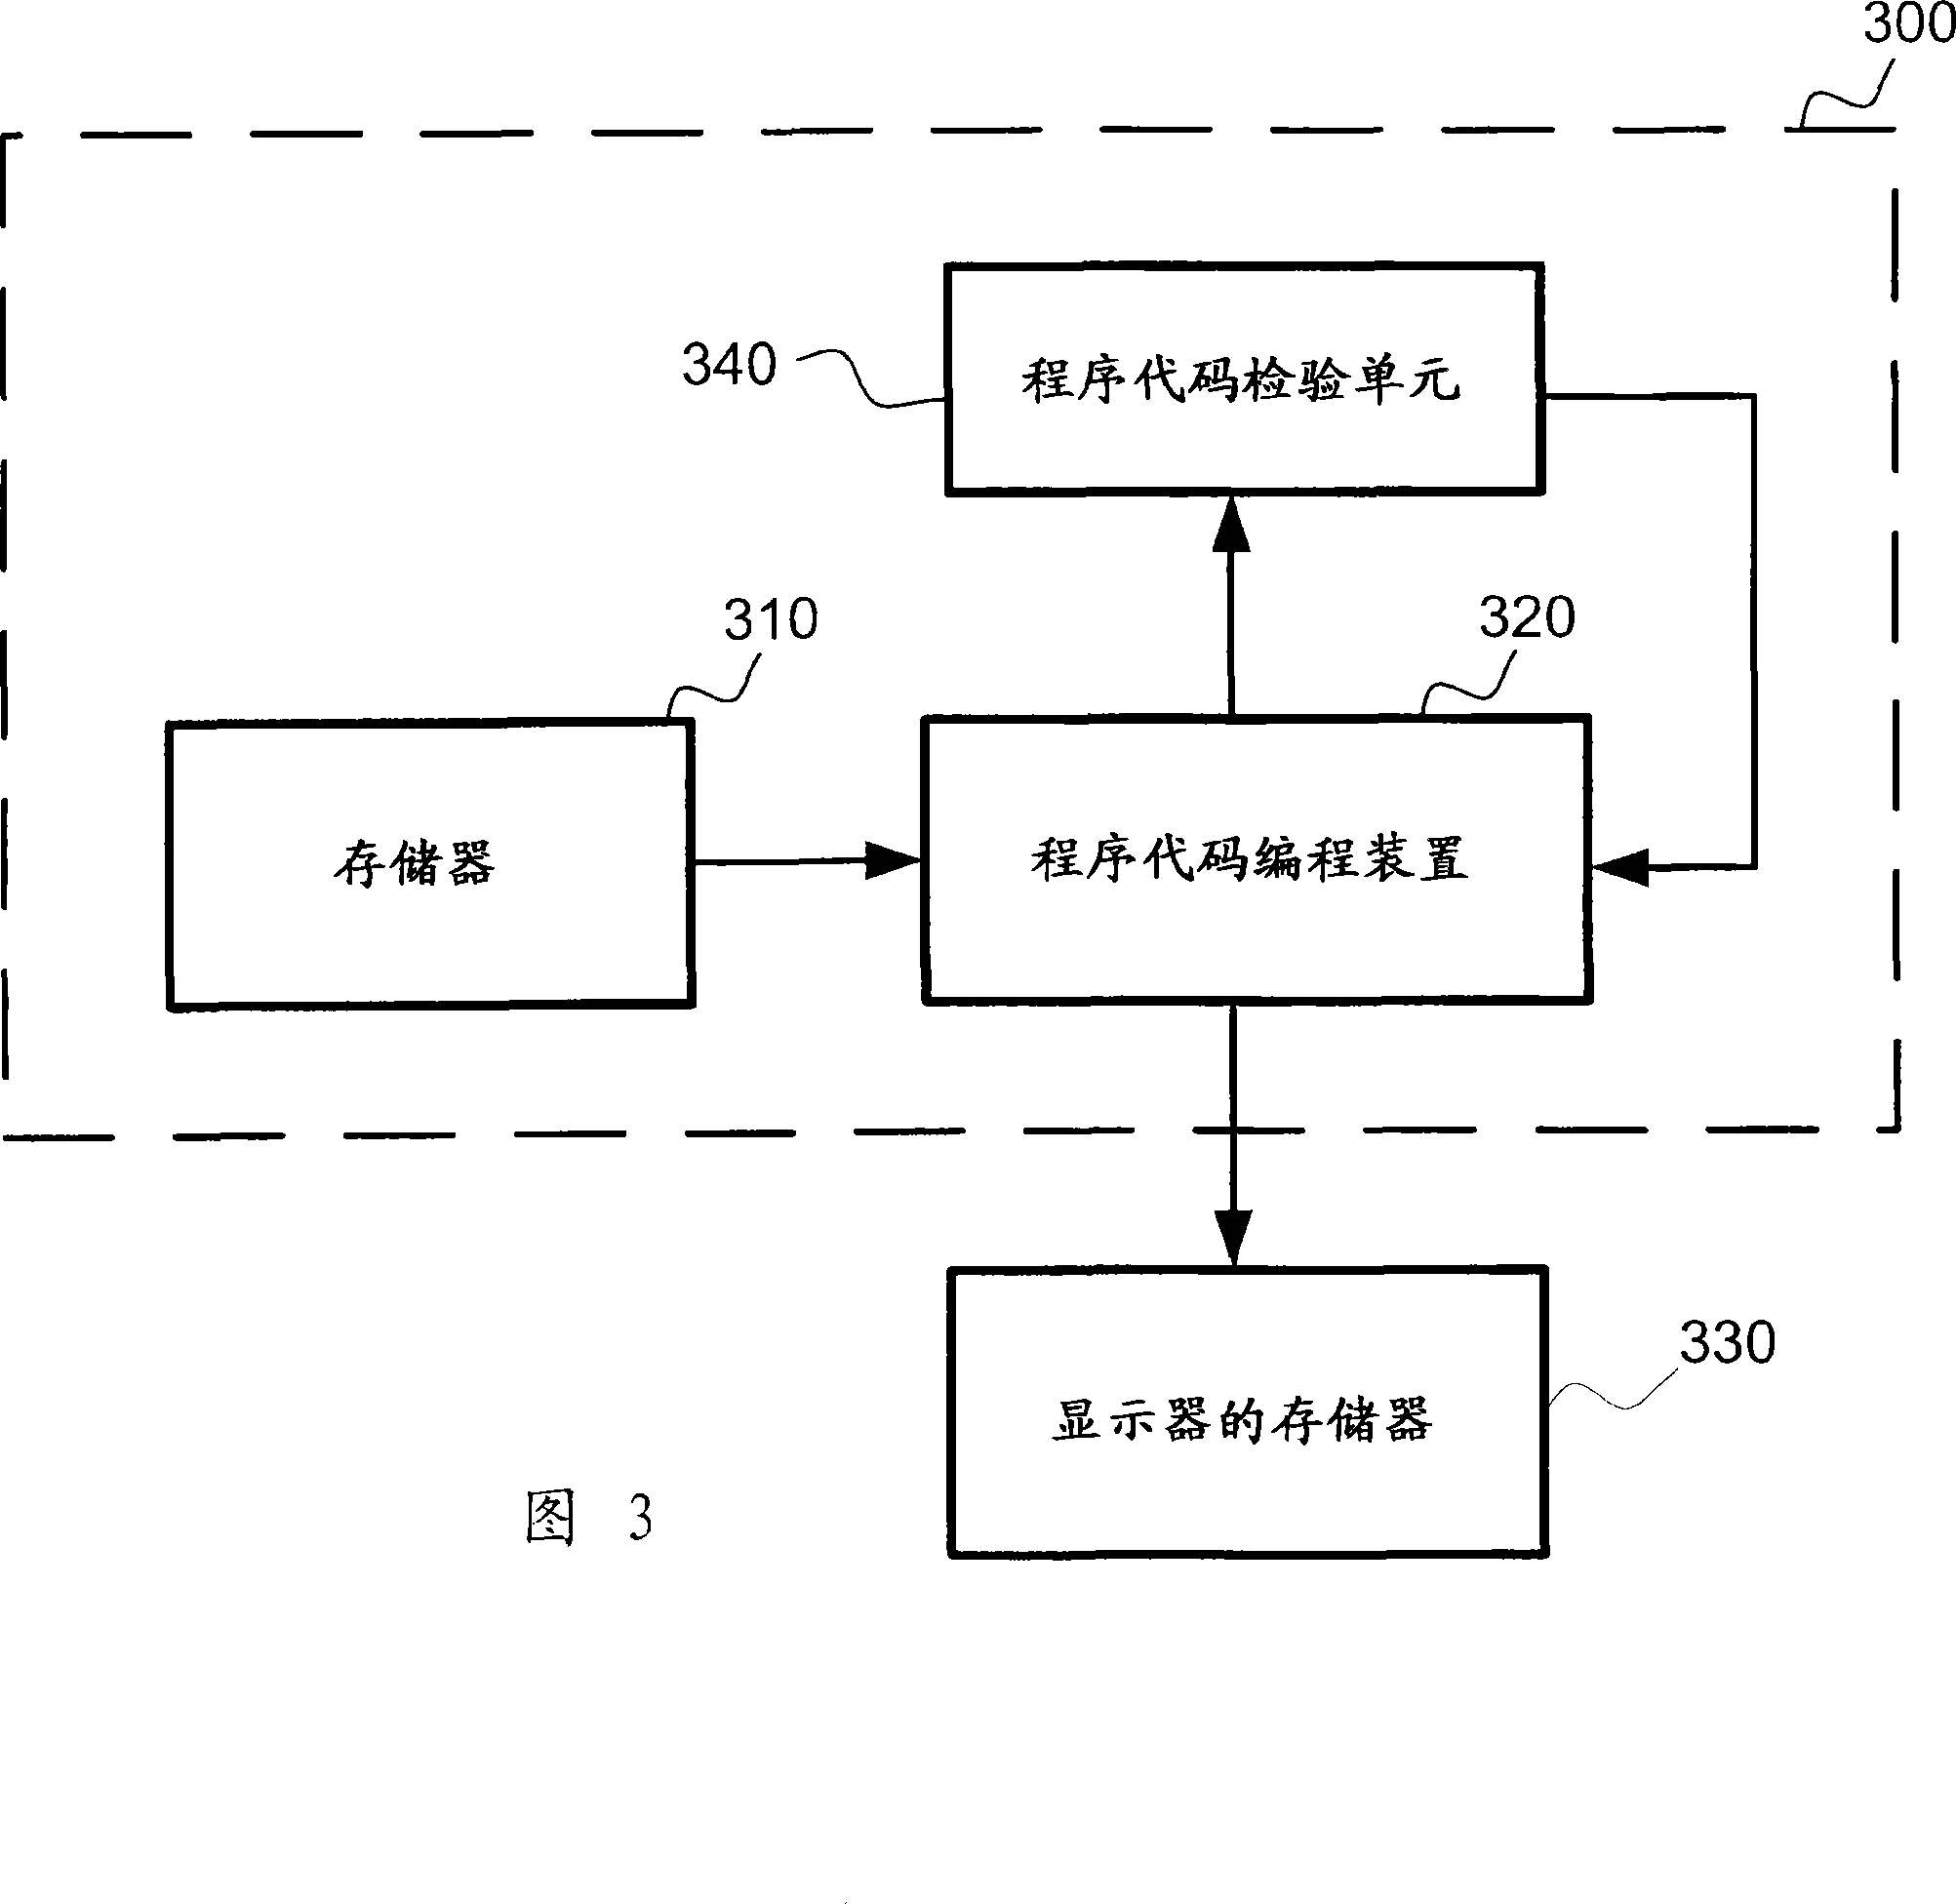 Apparatus and method for functional programming display